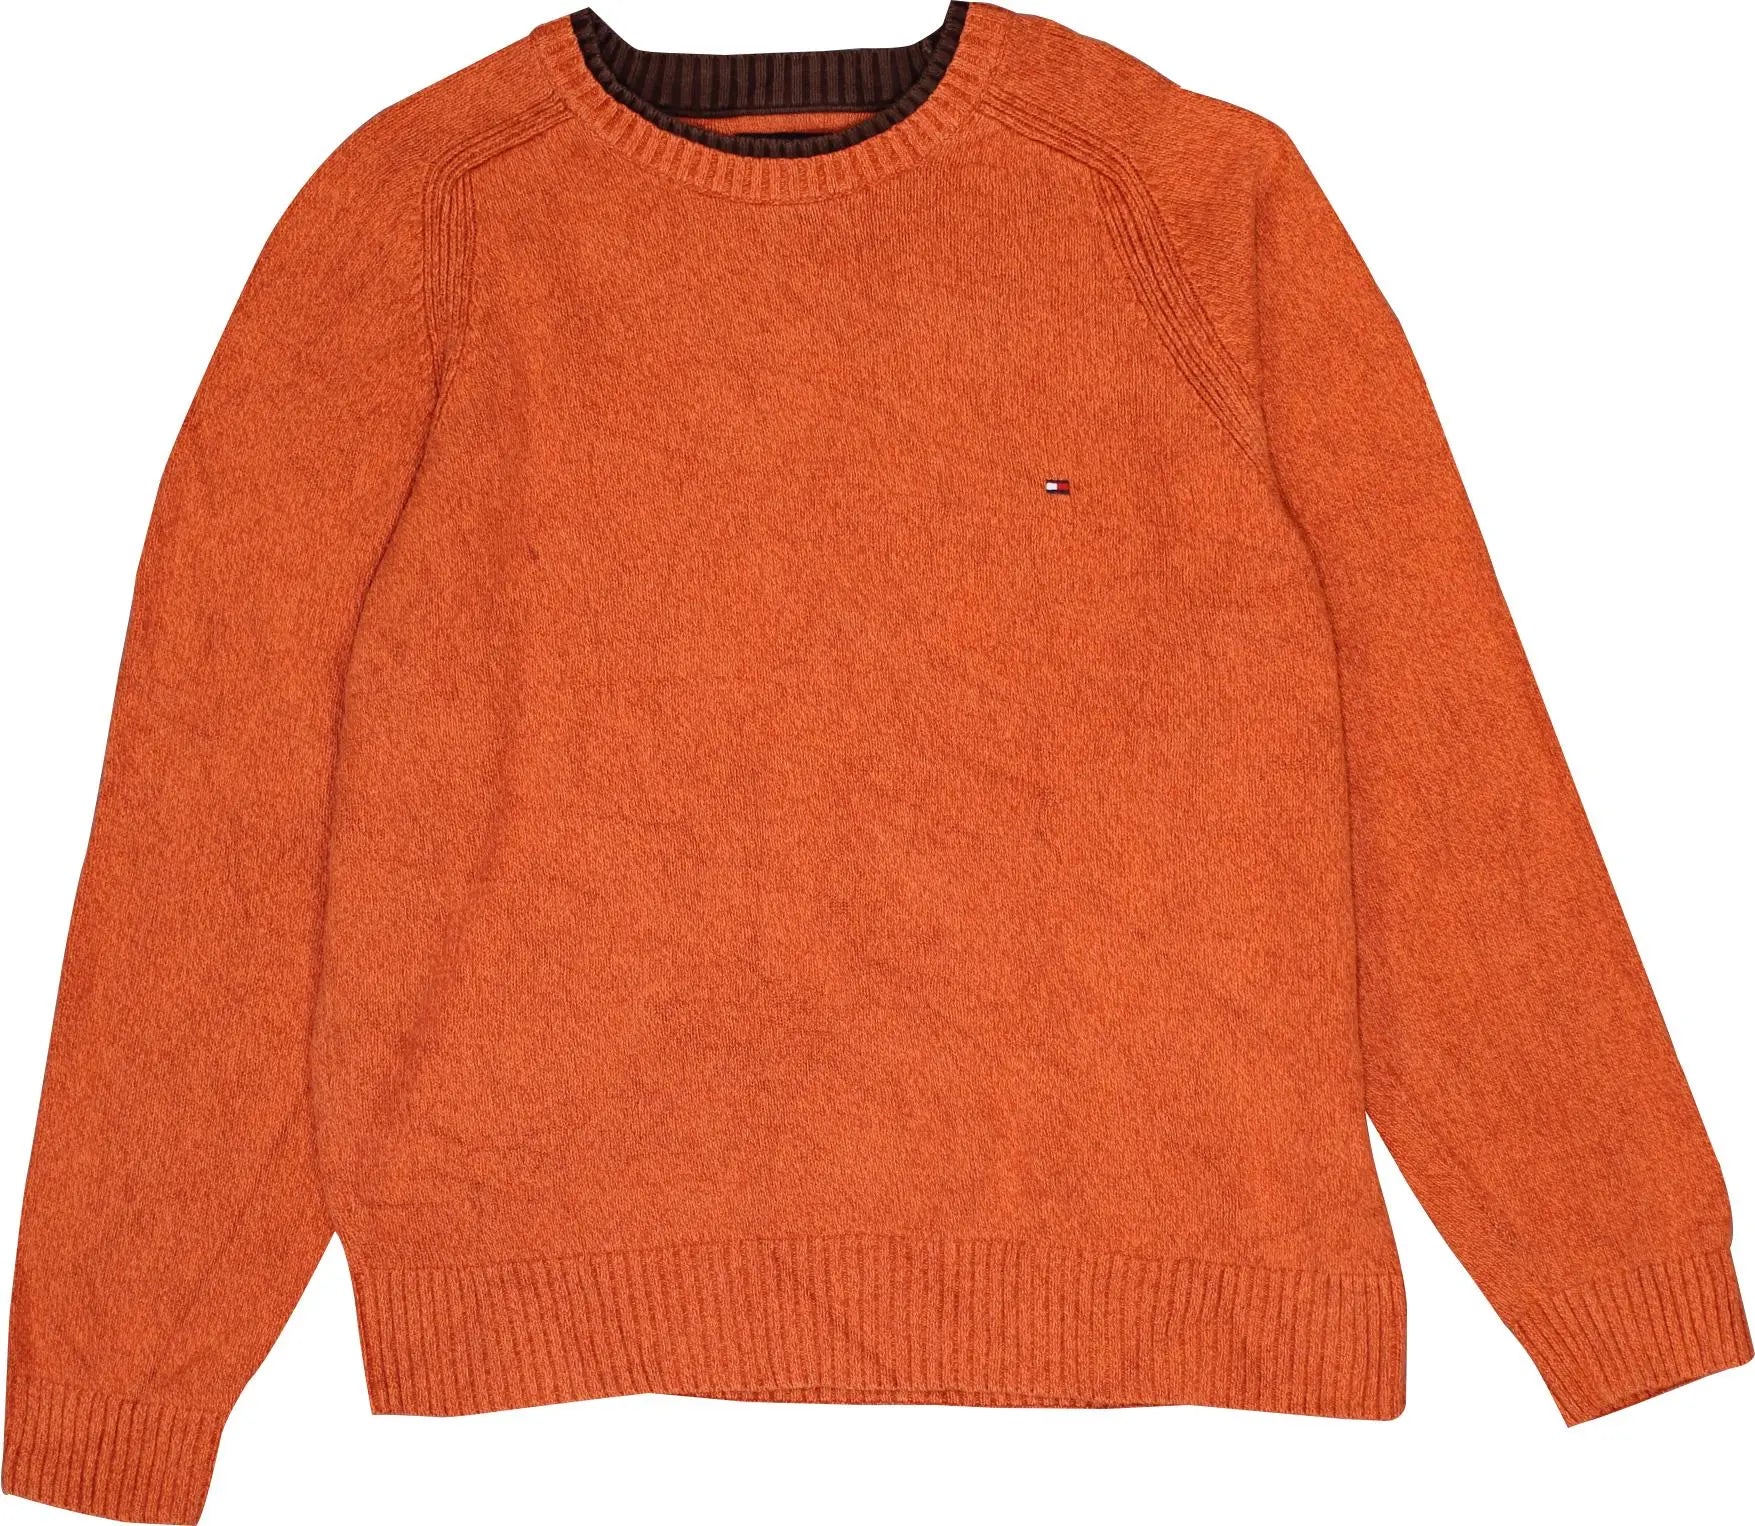 Tommy Hilfiger - Orange Sweater by Tommy Hilfiger- ThriftTale.com - Vintage and second handclothing